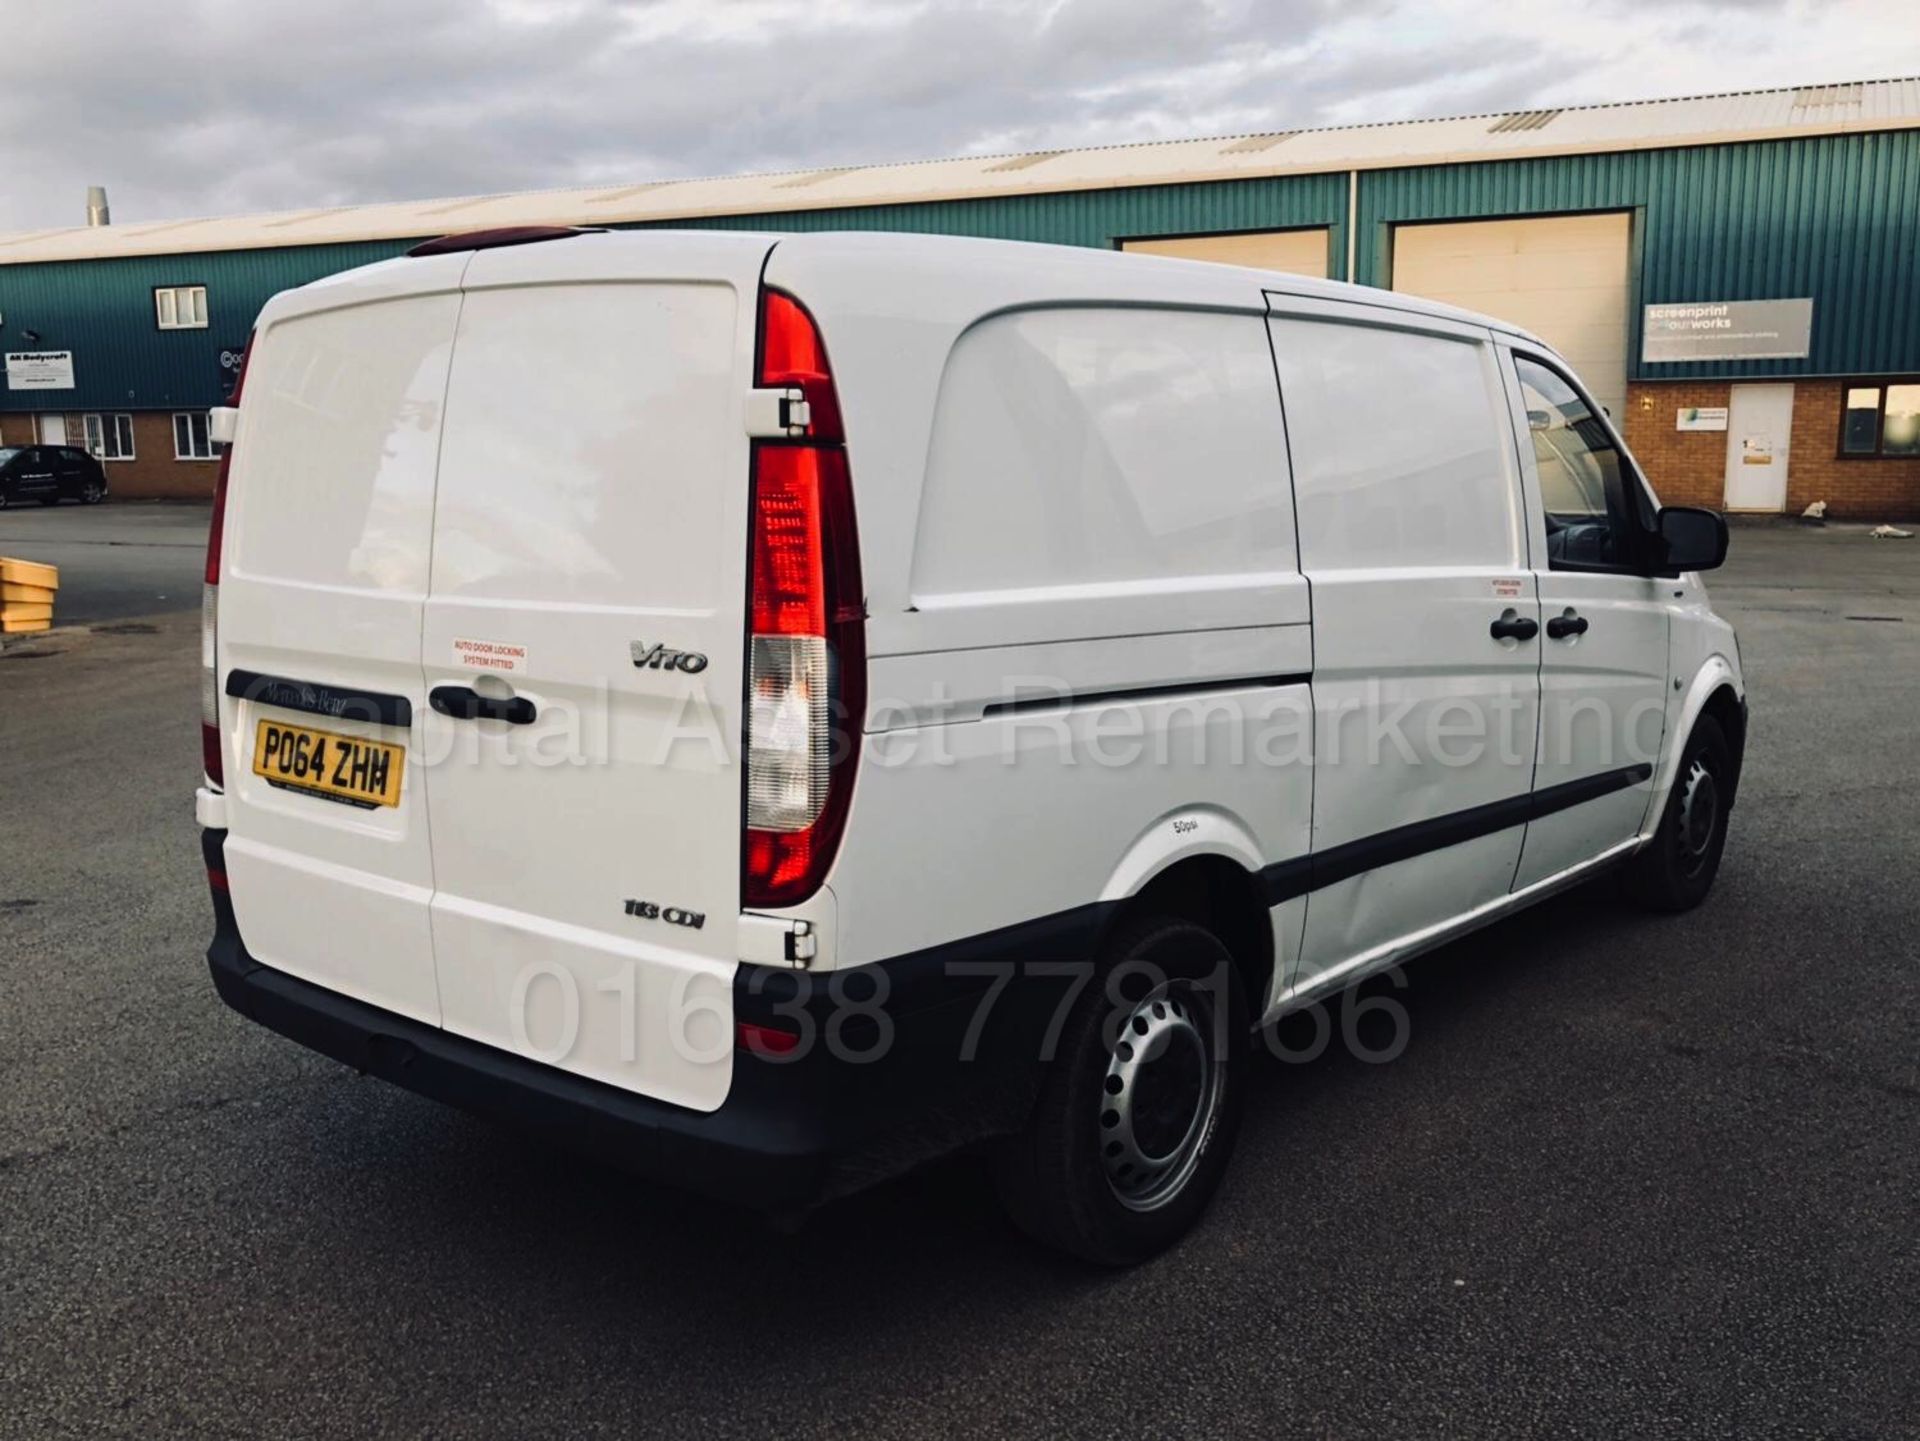 MERCEDES VITO 113CDI LWB (2015 MODEL - NEW SHAPE) 1 OWNER - LOW MILES - ELEC PACK - 130BHP - 6 SPEED - Image 7 of 30